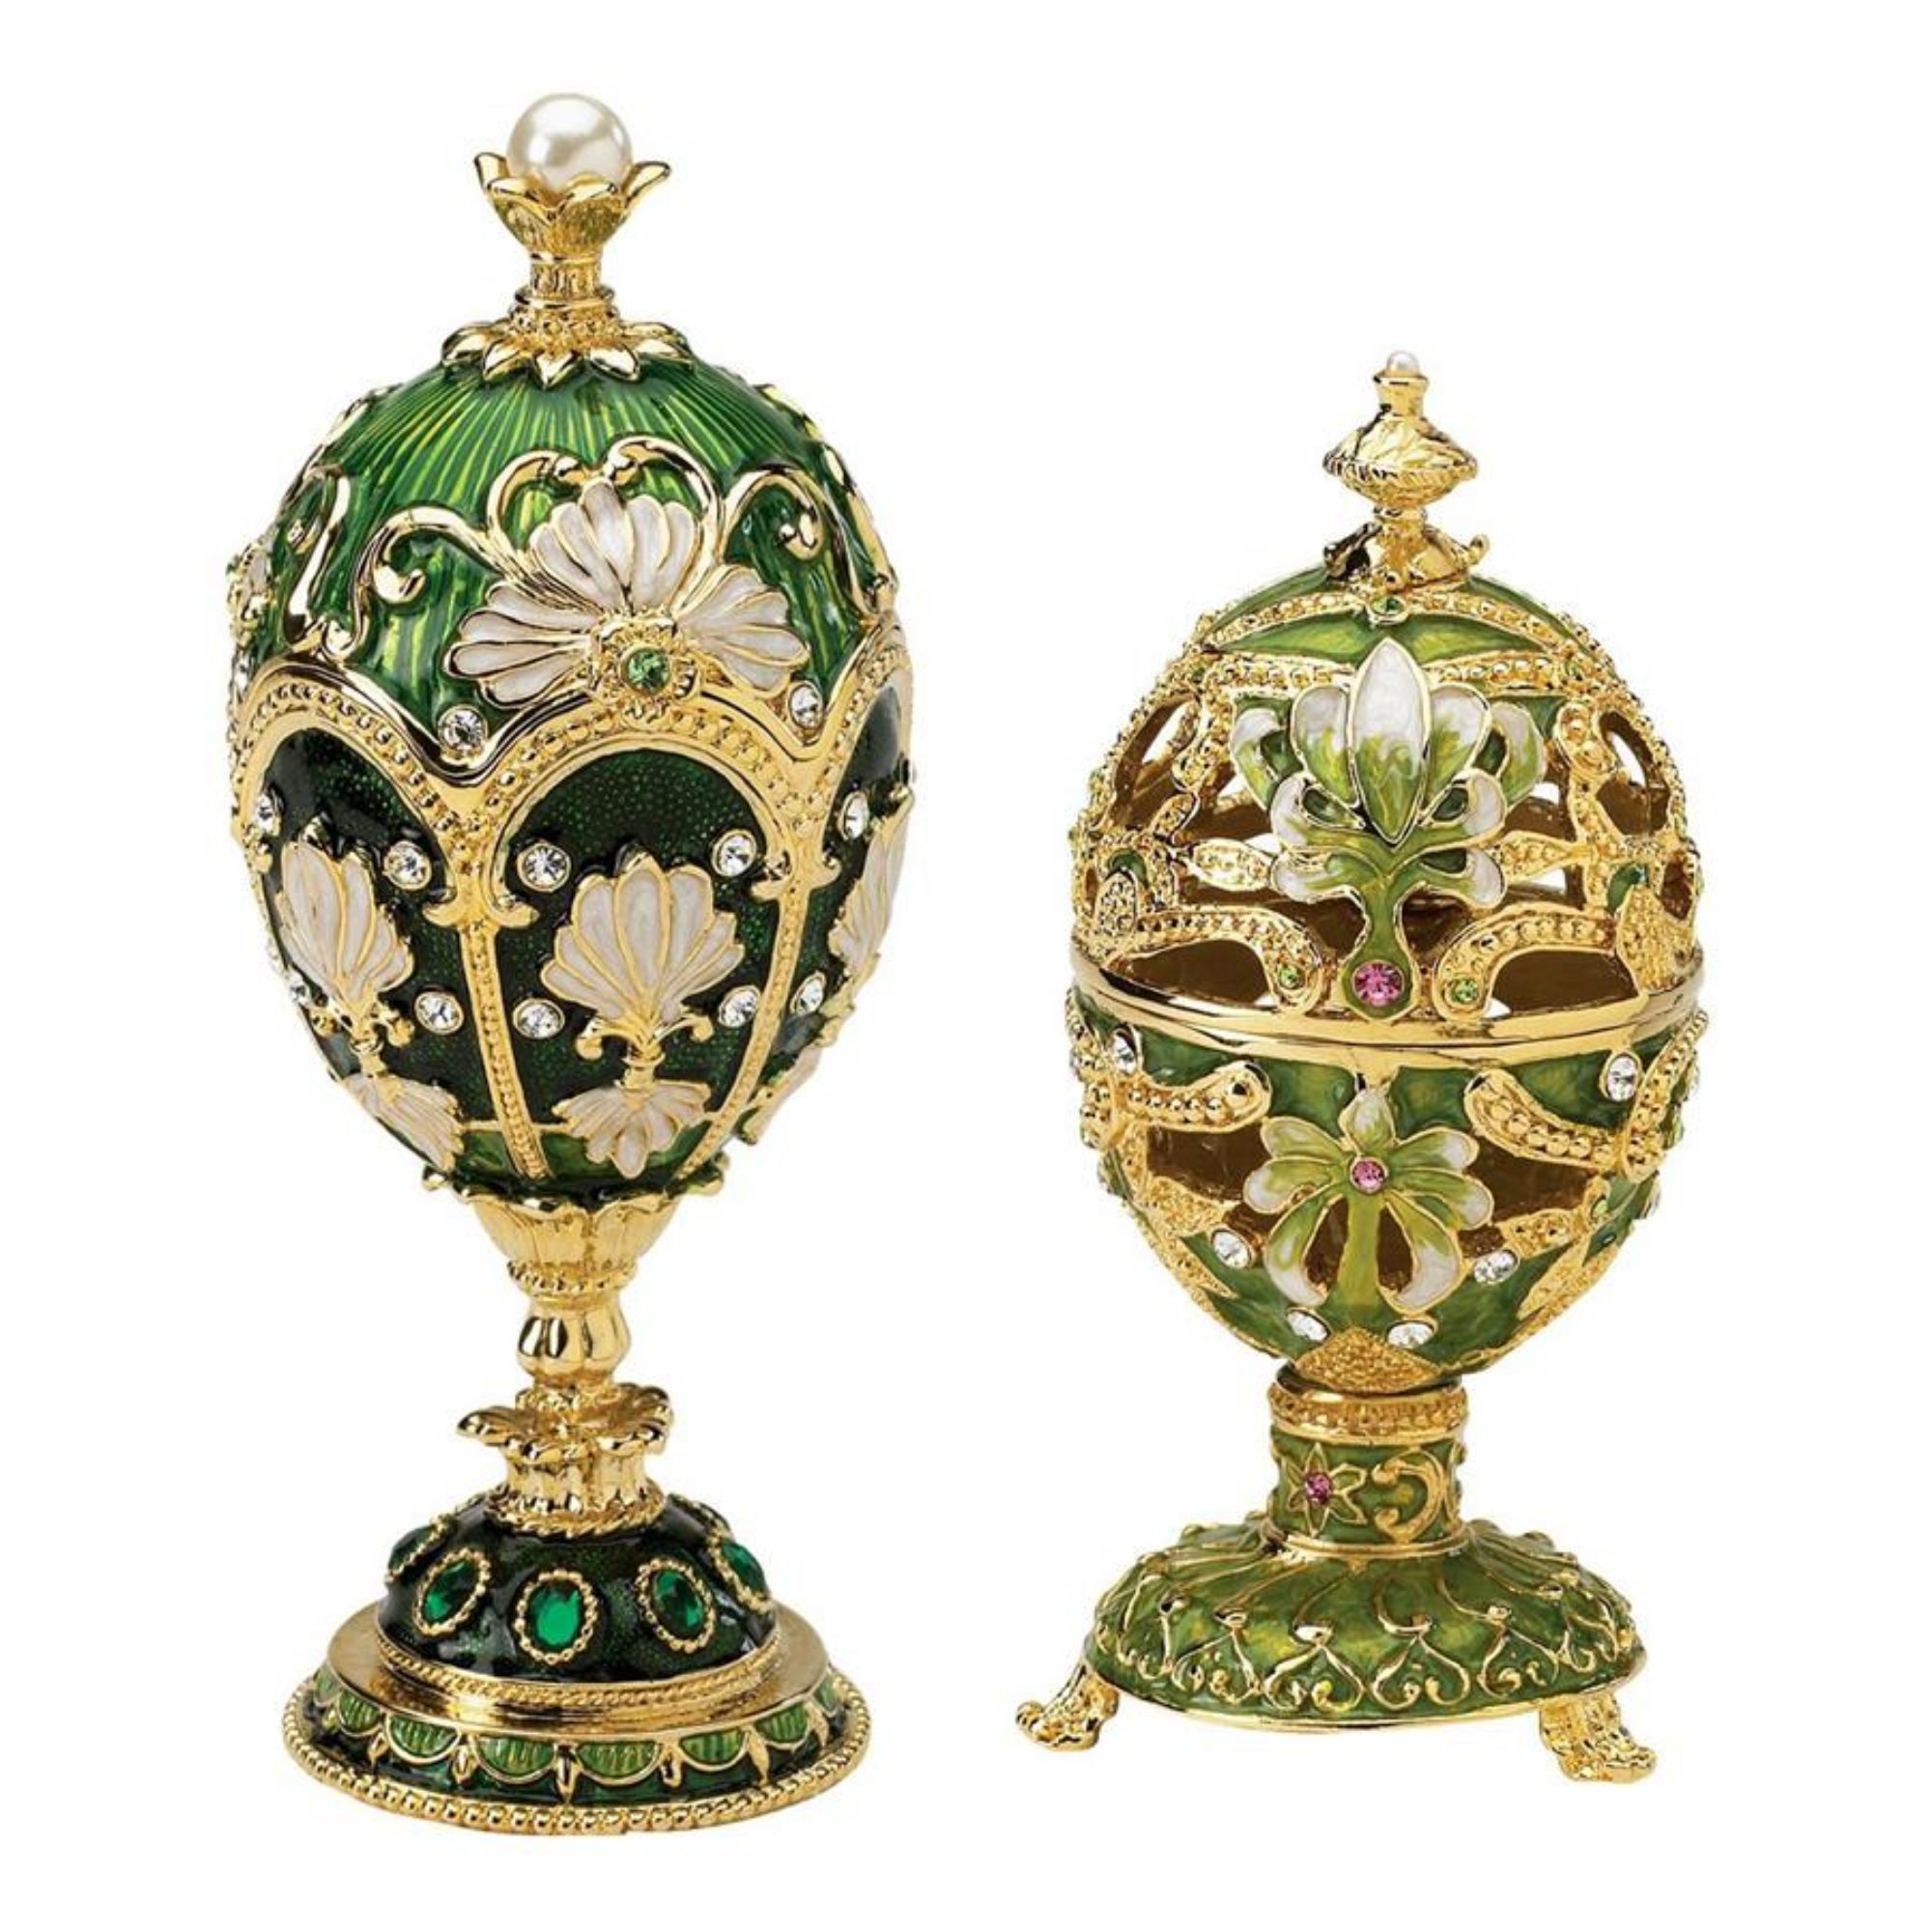 Outdoor Living and Style Petroika Romanov-Style Collectible Enameled Eggs - 3" - Set of 2